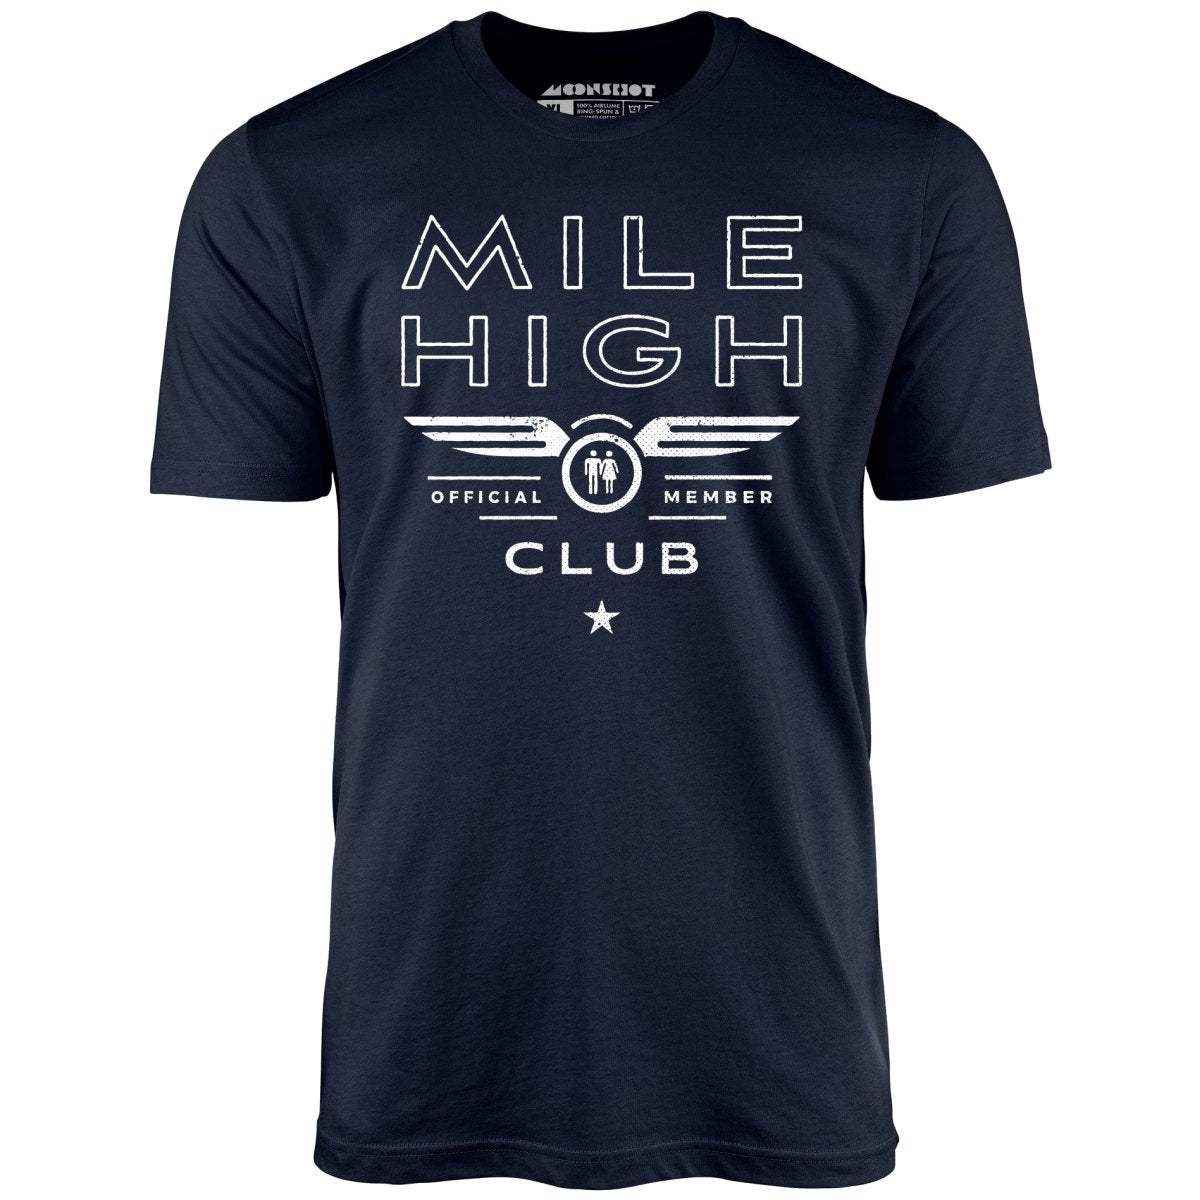 Mile High Club Official Member - Unisex T-Shirt